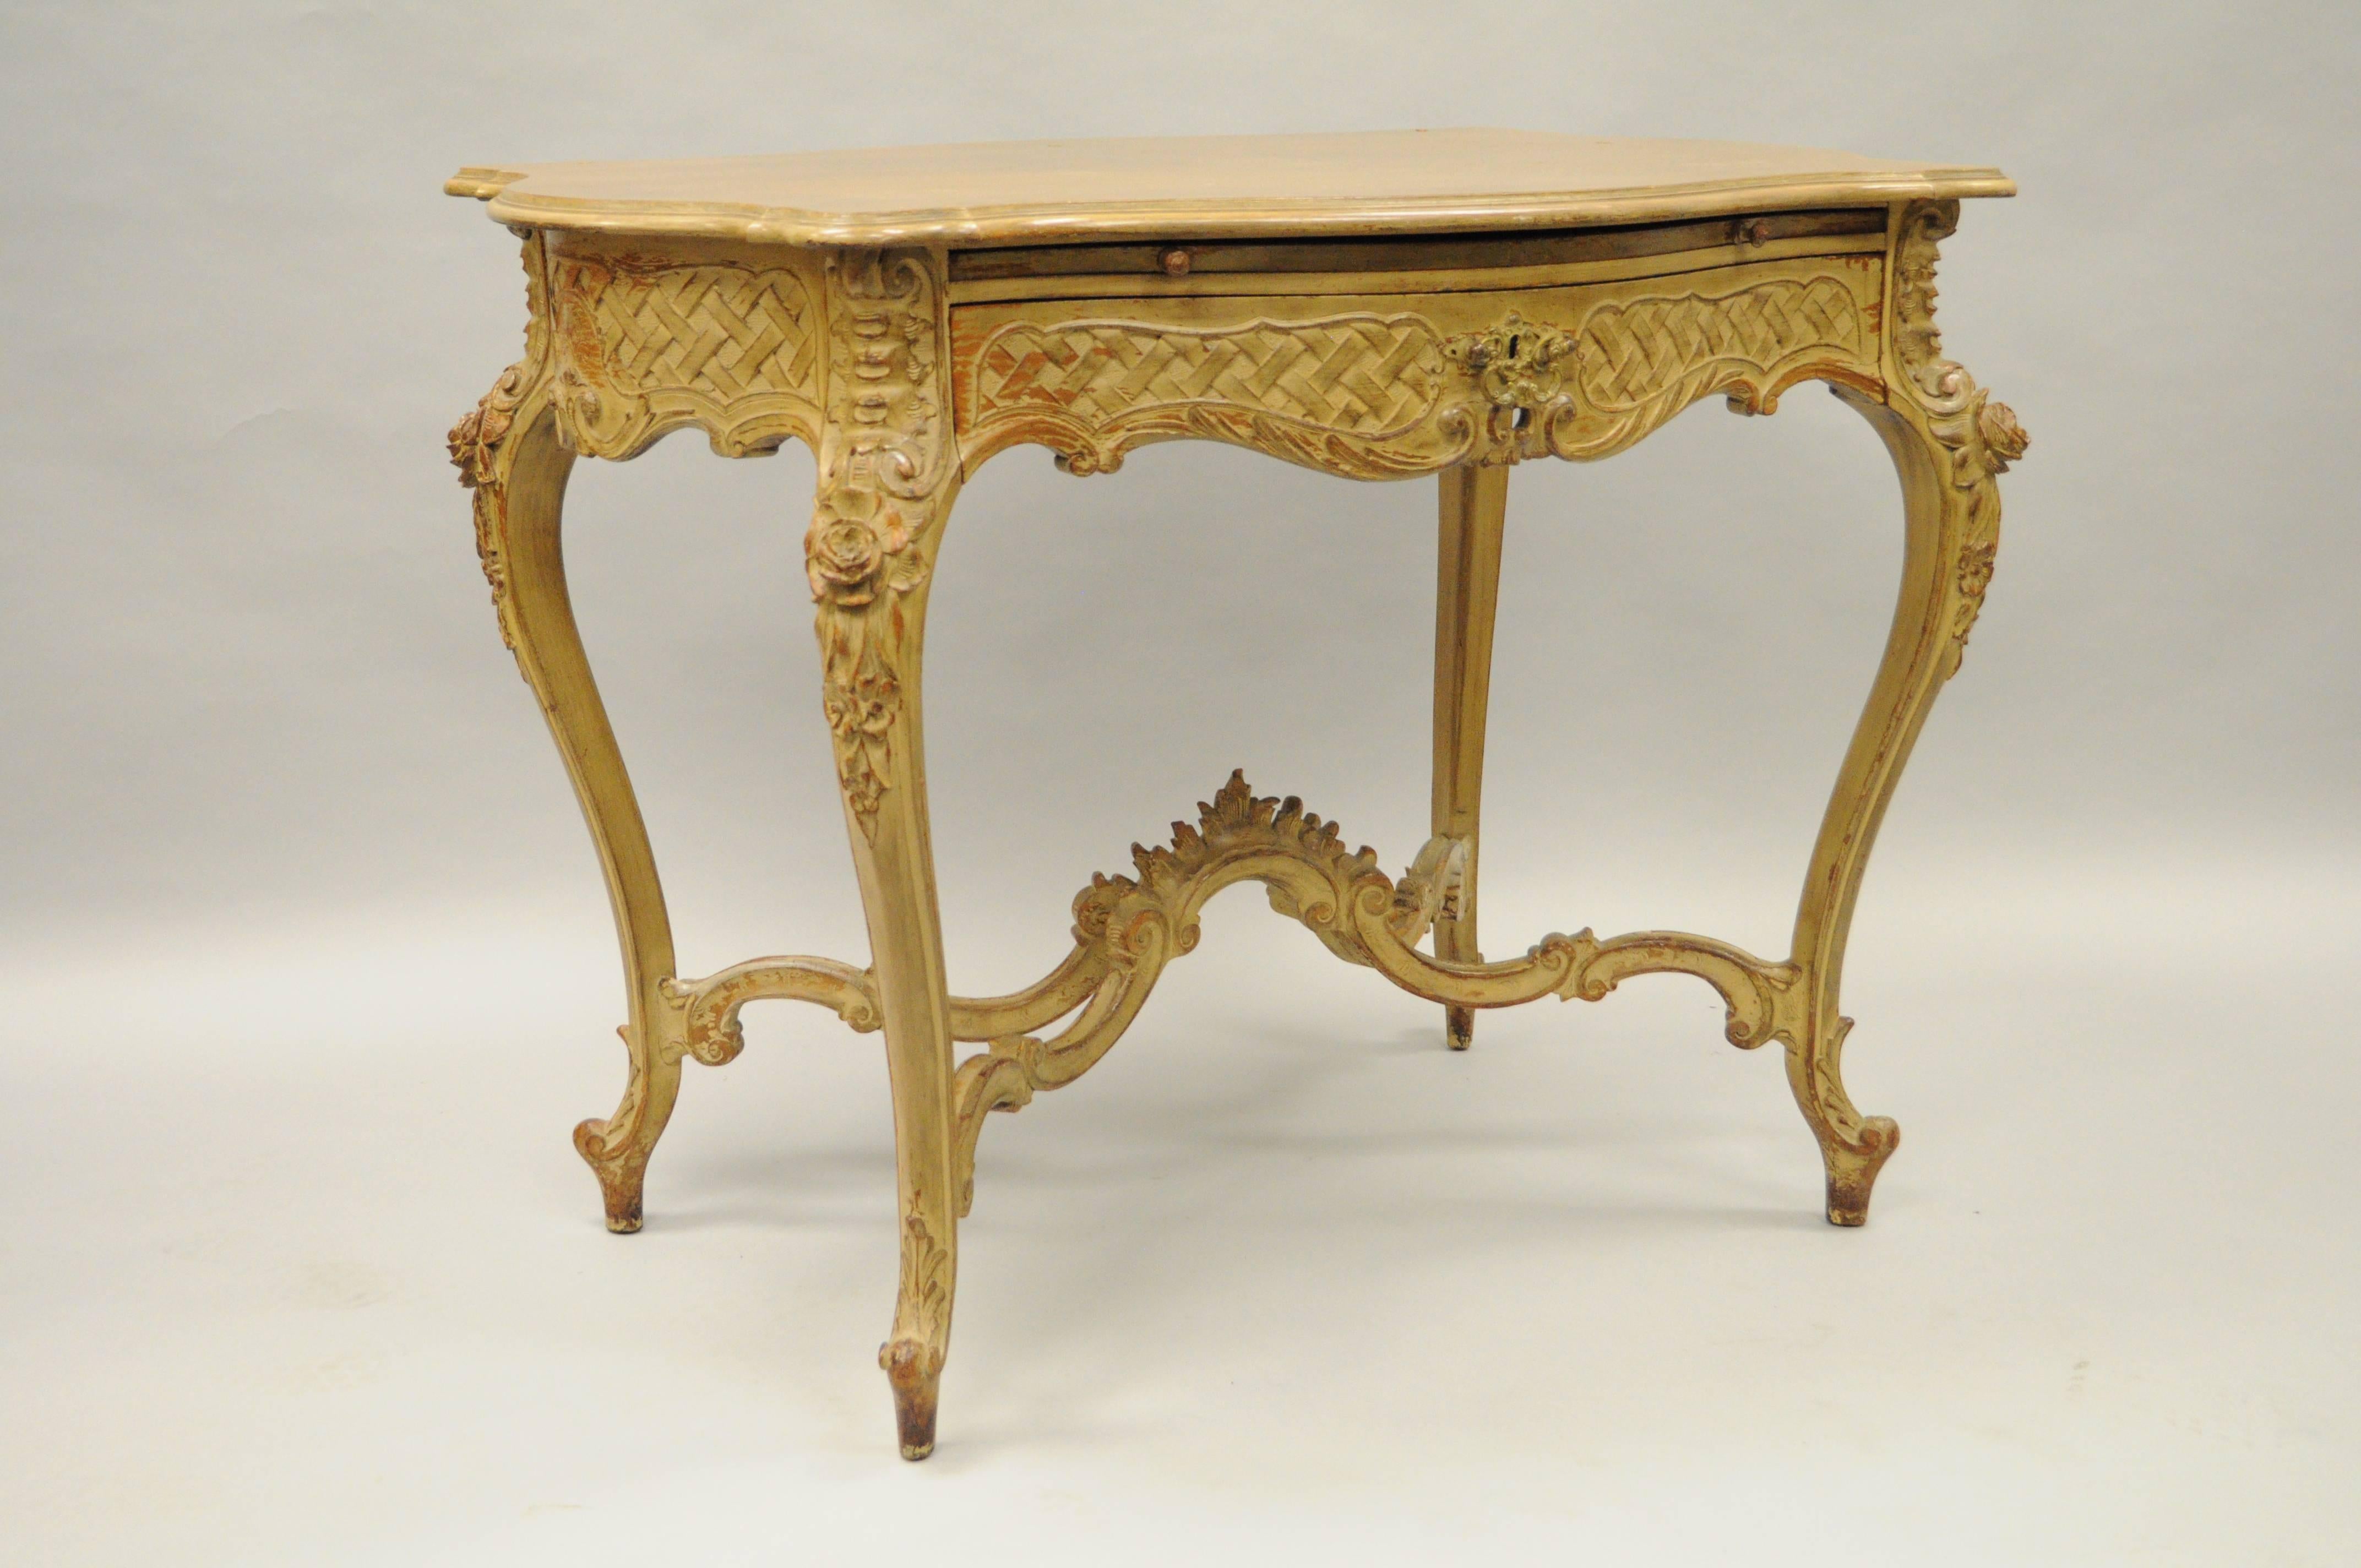 Antique French Louis XV / Rococo style hand-carved and distressed dressing table / ladies writing desk. Item features a shaped turtle top with diamond sunburst veneer, single hand dovetailed drawer, pull-out velvet surface, ornate stretcher